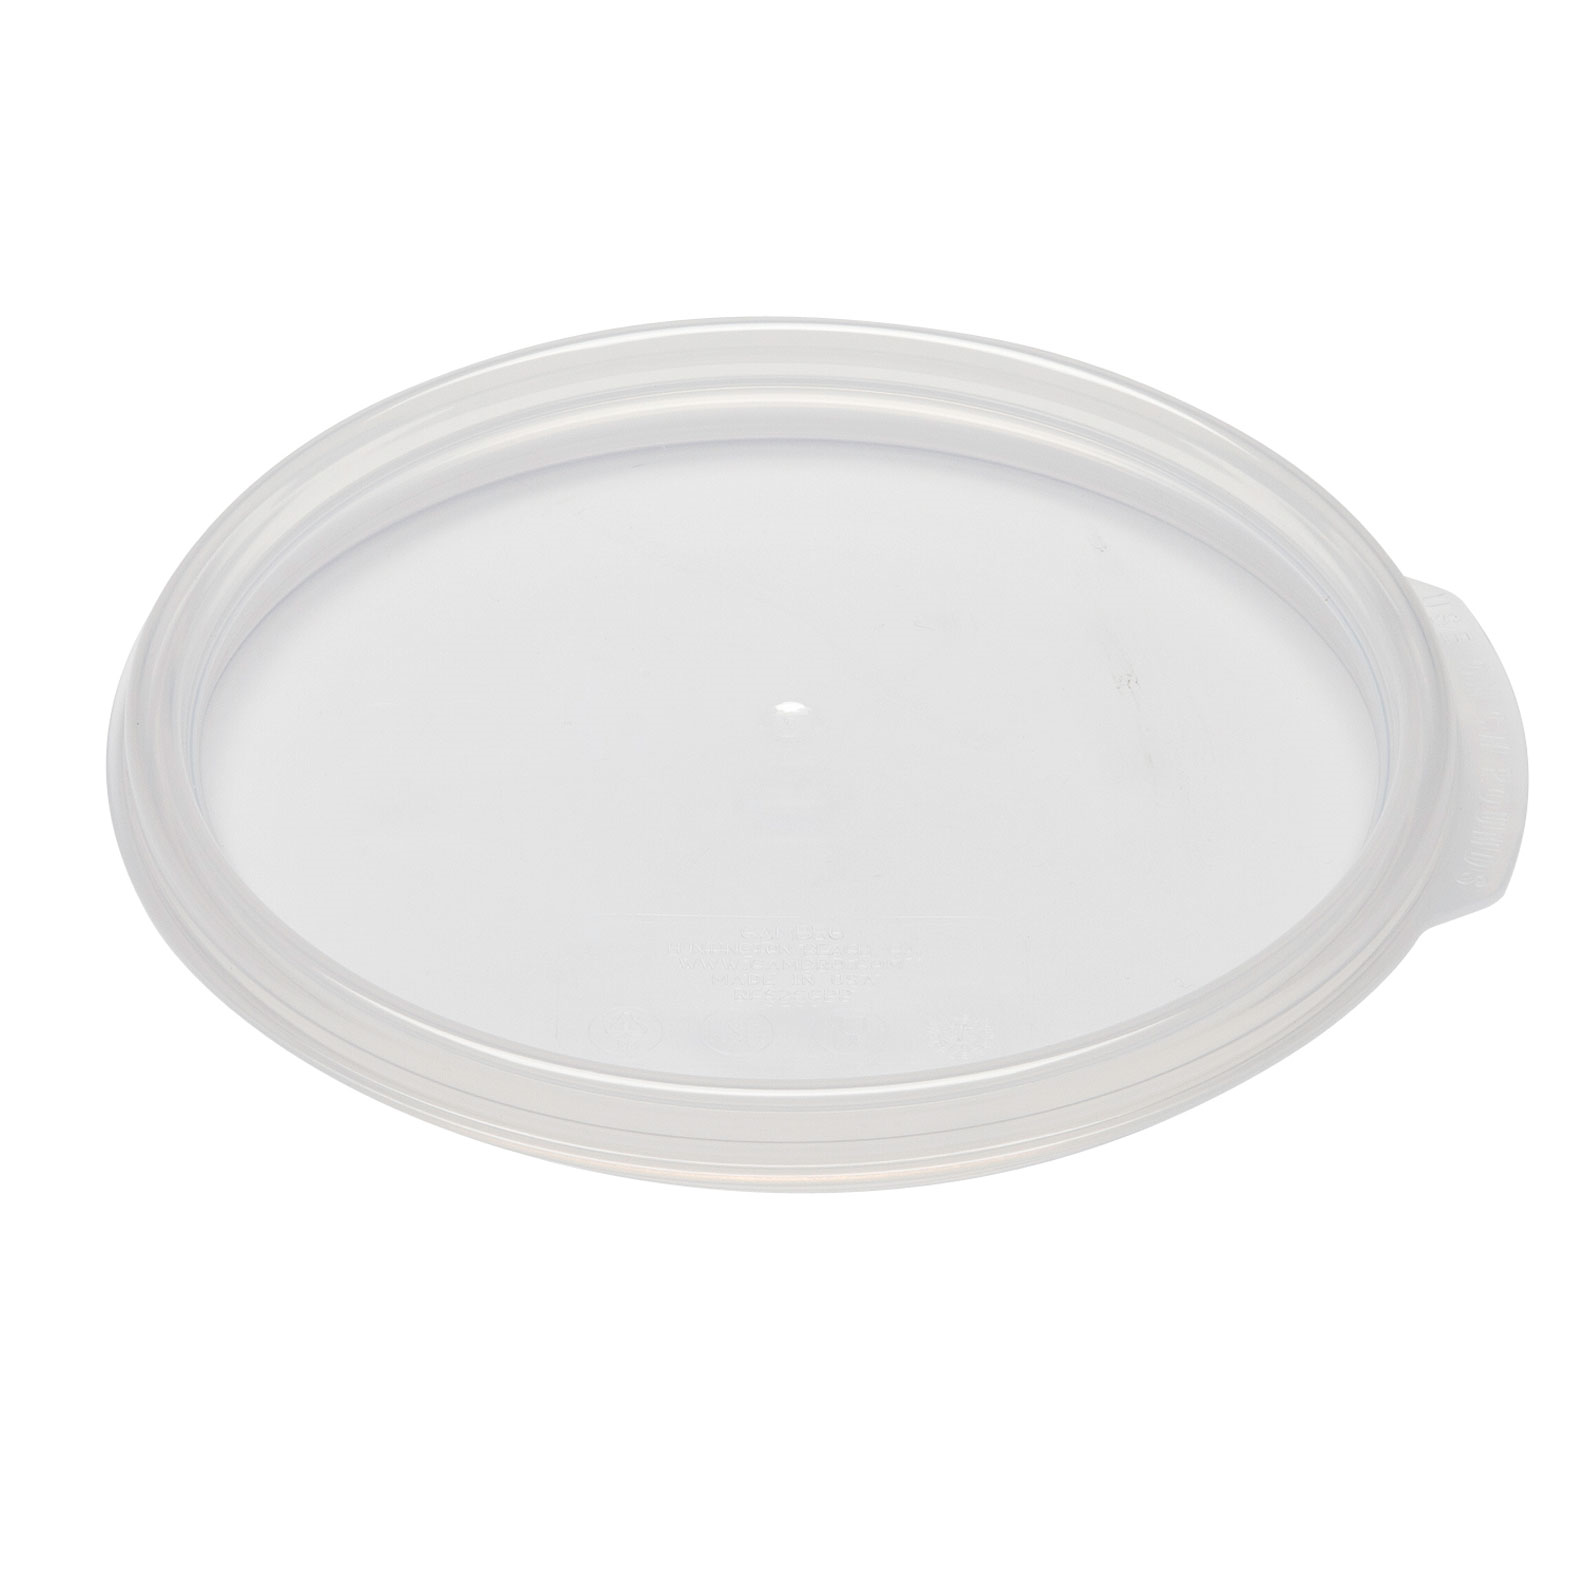 SEAL COVER FOR CW CLEAR 12,
18 &amp; 22qt. ROUND FOOD
CONTAINERS, EACH 4/22